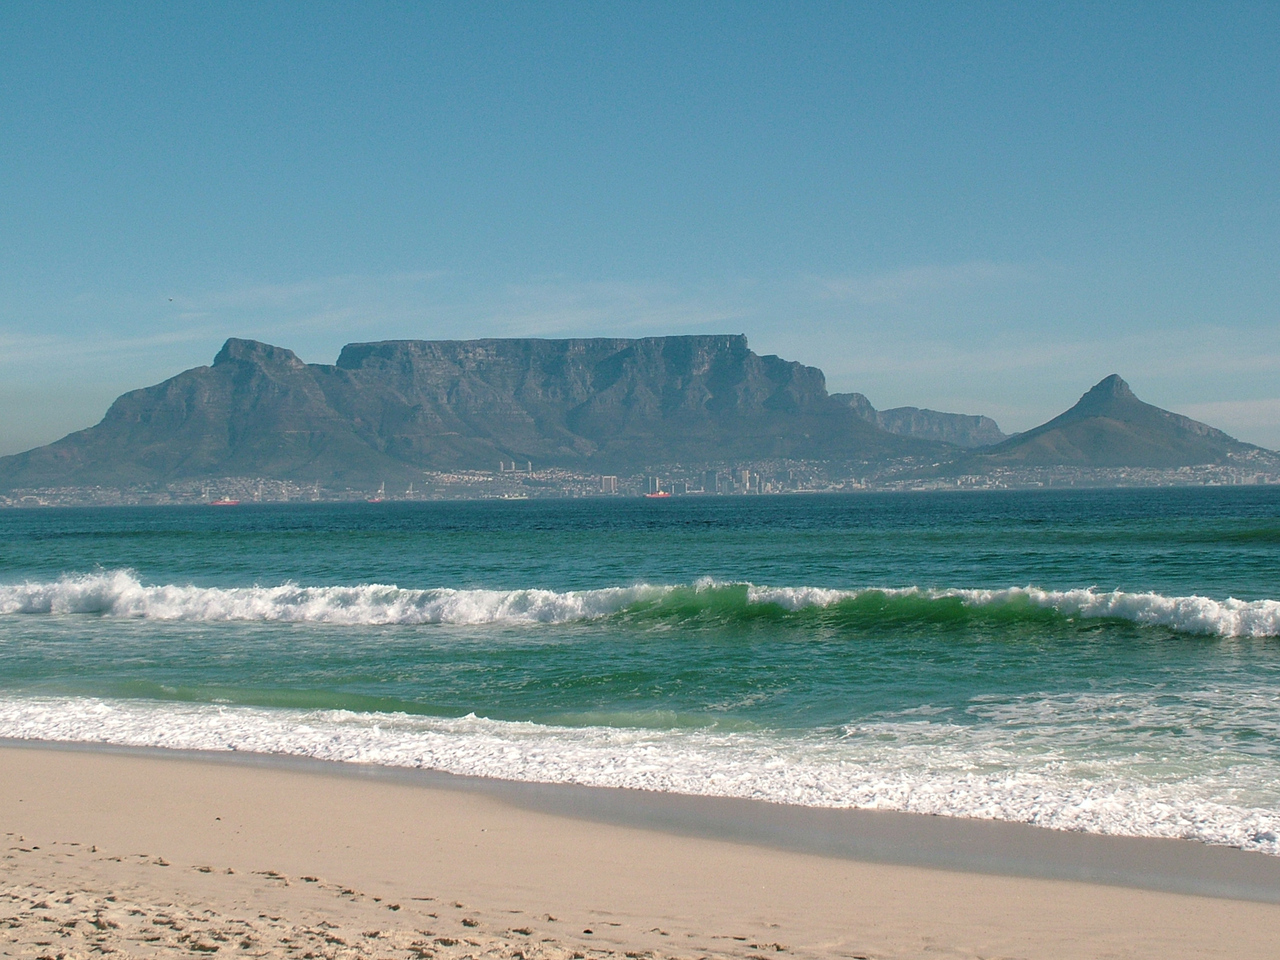 Montreal to Cape Town, South Africa – $668 CAD roundtrip including taxes | Qatar Airways